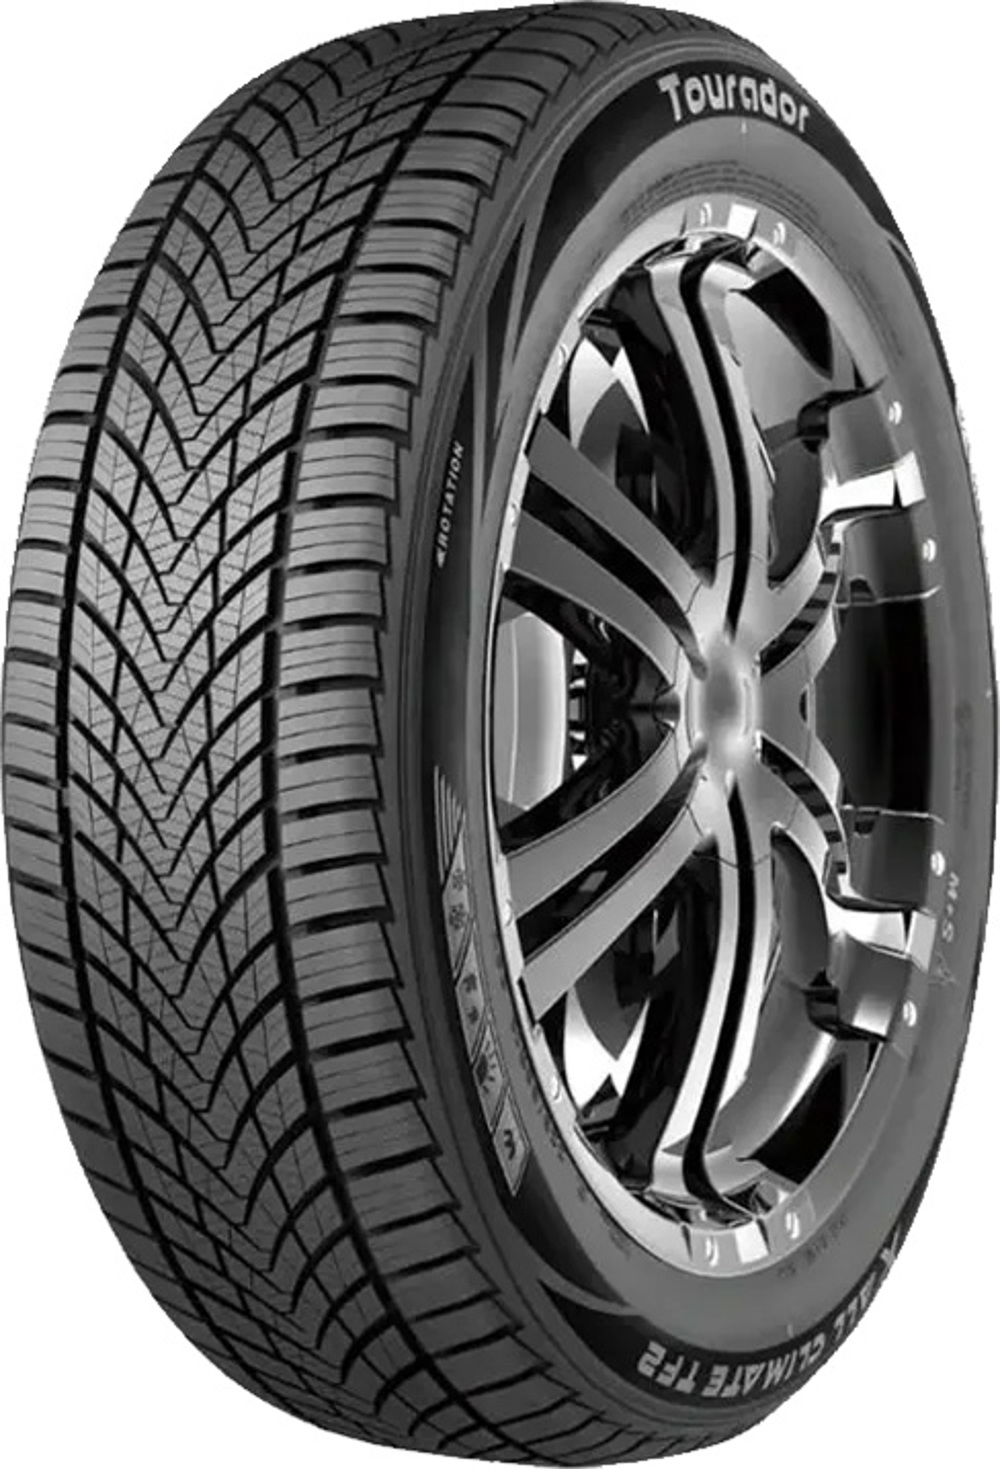 Gomme Nuove Tourador 165/70 R14 85T X ALL CLIMATE TF2 XL M+S pneumatici nuovi All Season